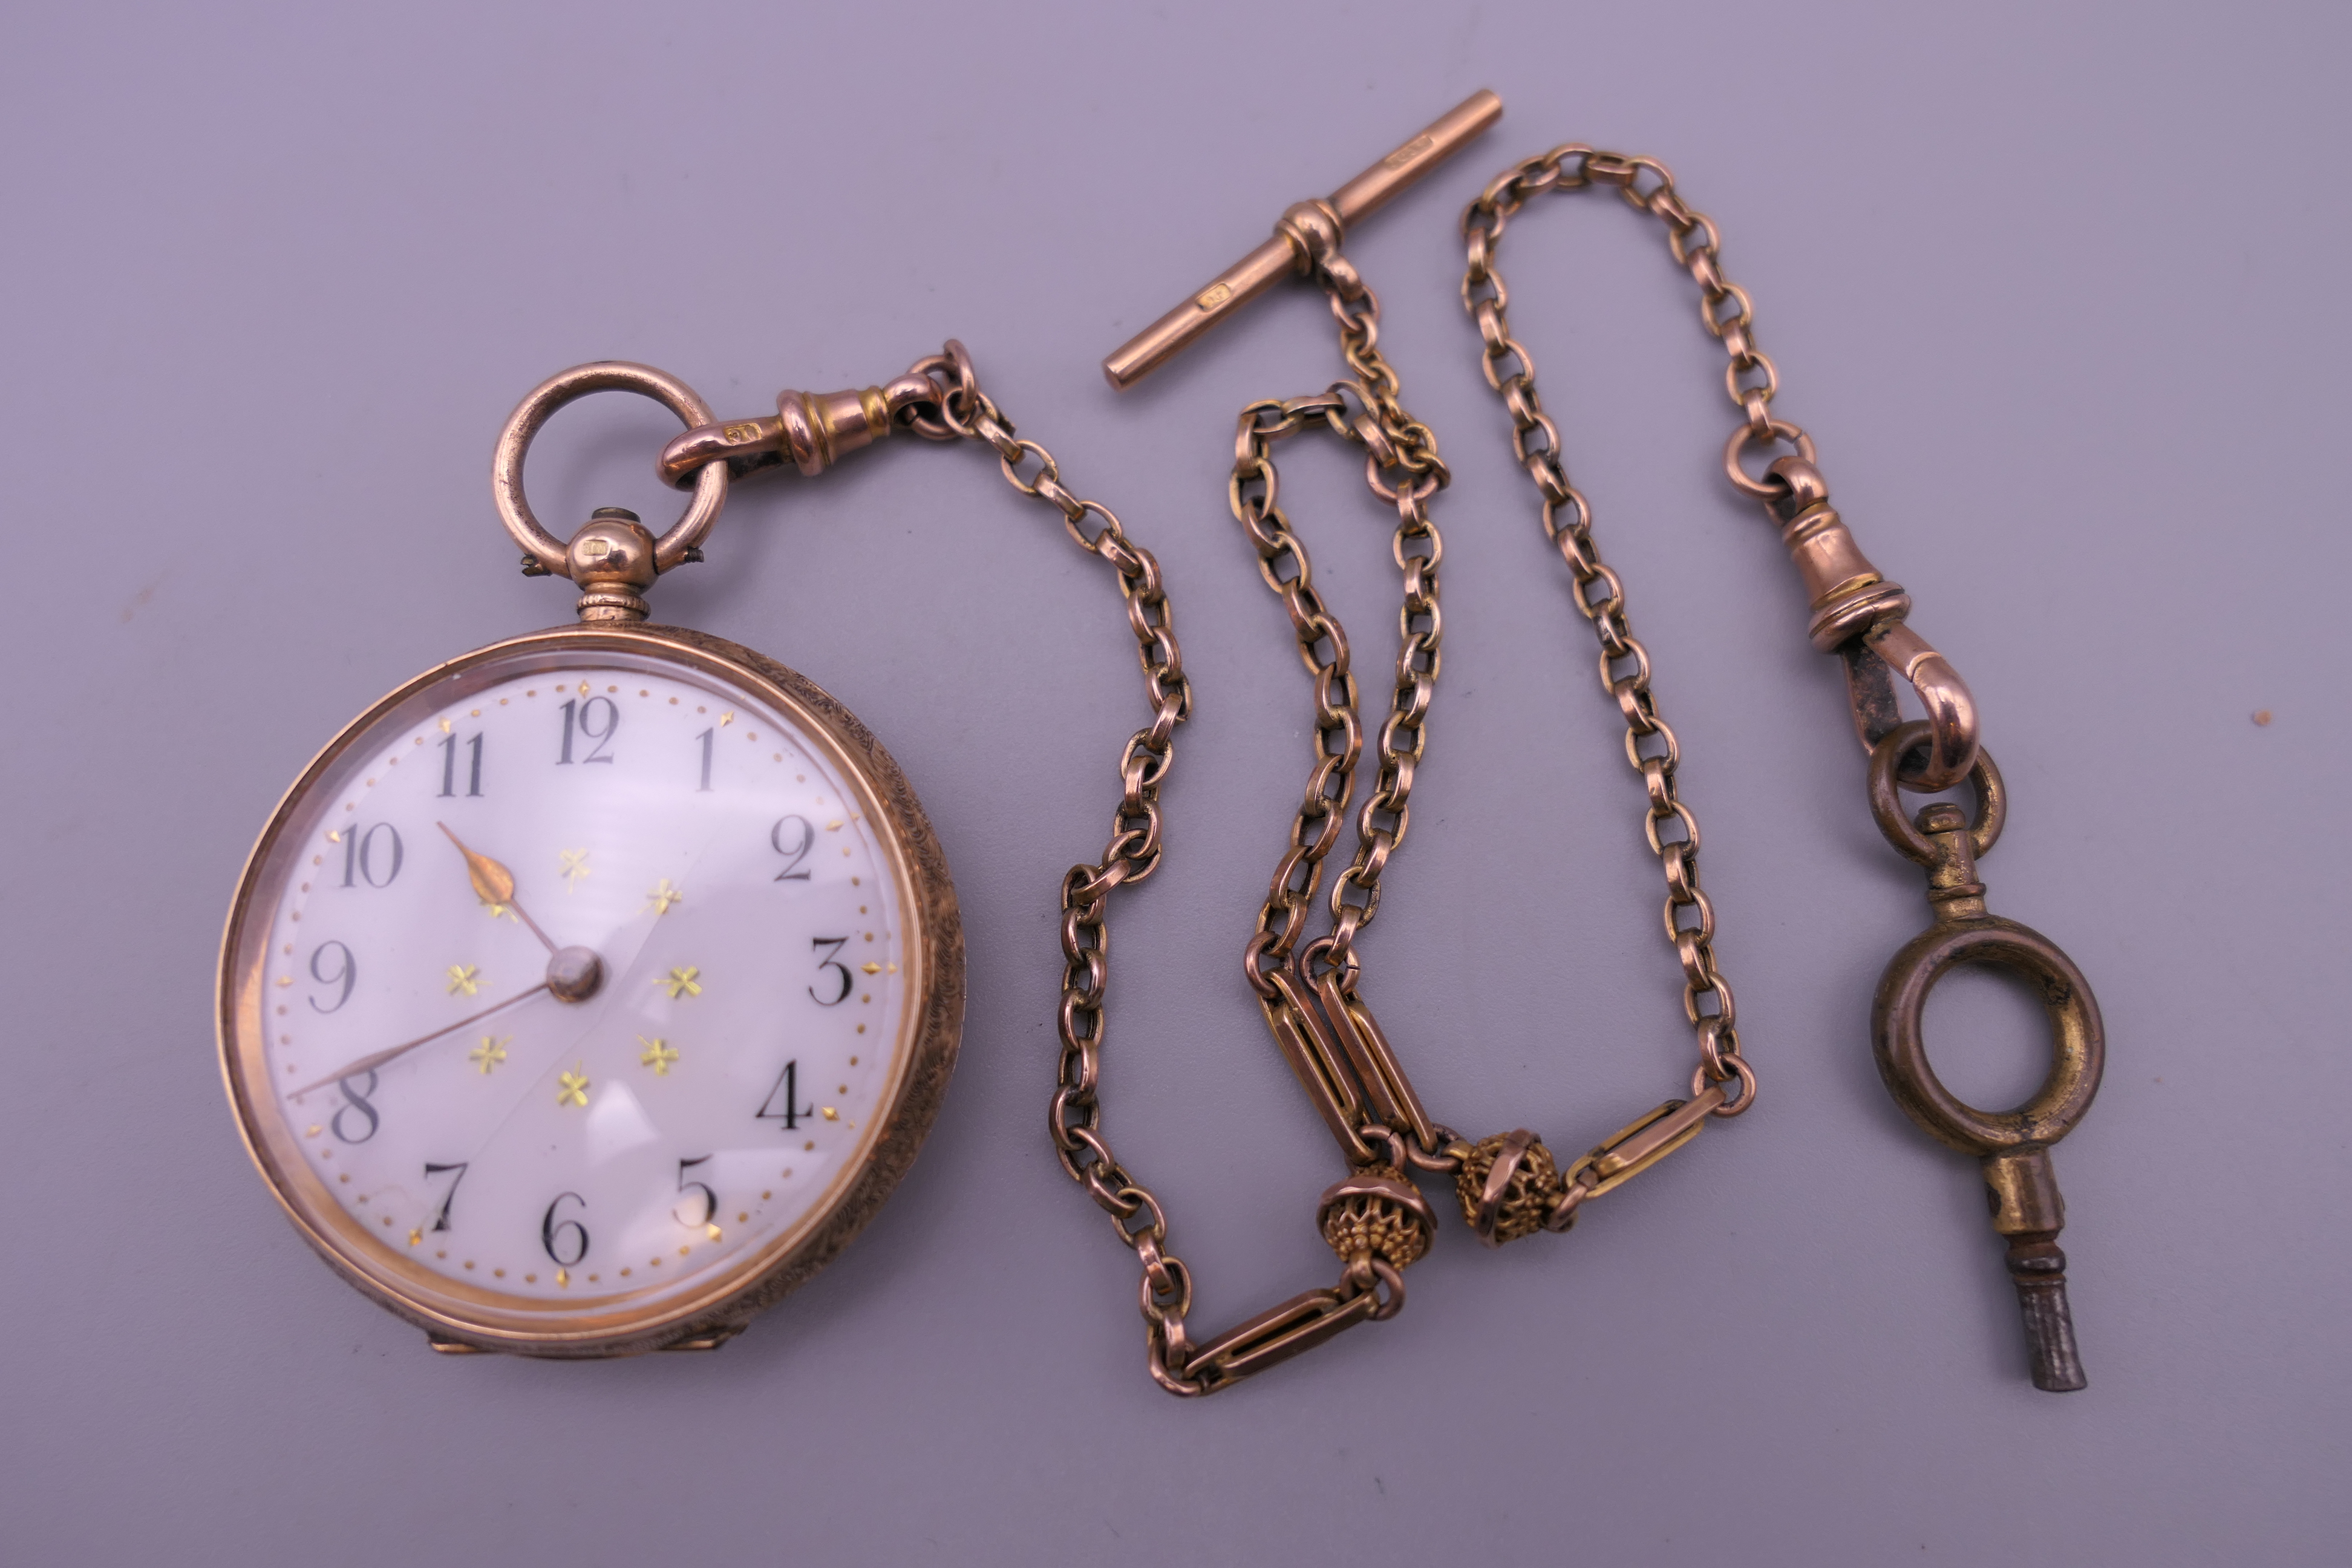 A ladies 14 K gold pocket watch (33 grammes total weight) on a 9 ct gold chain (7 grammes). Watch 3.